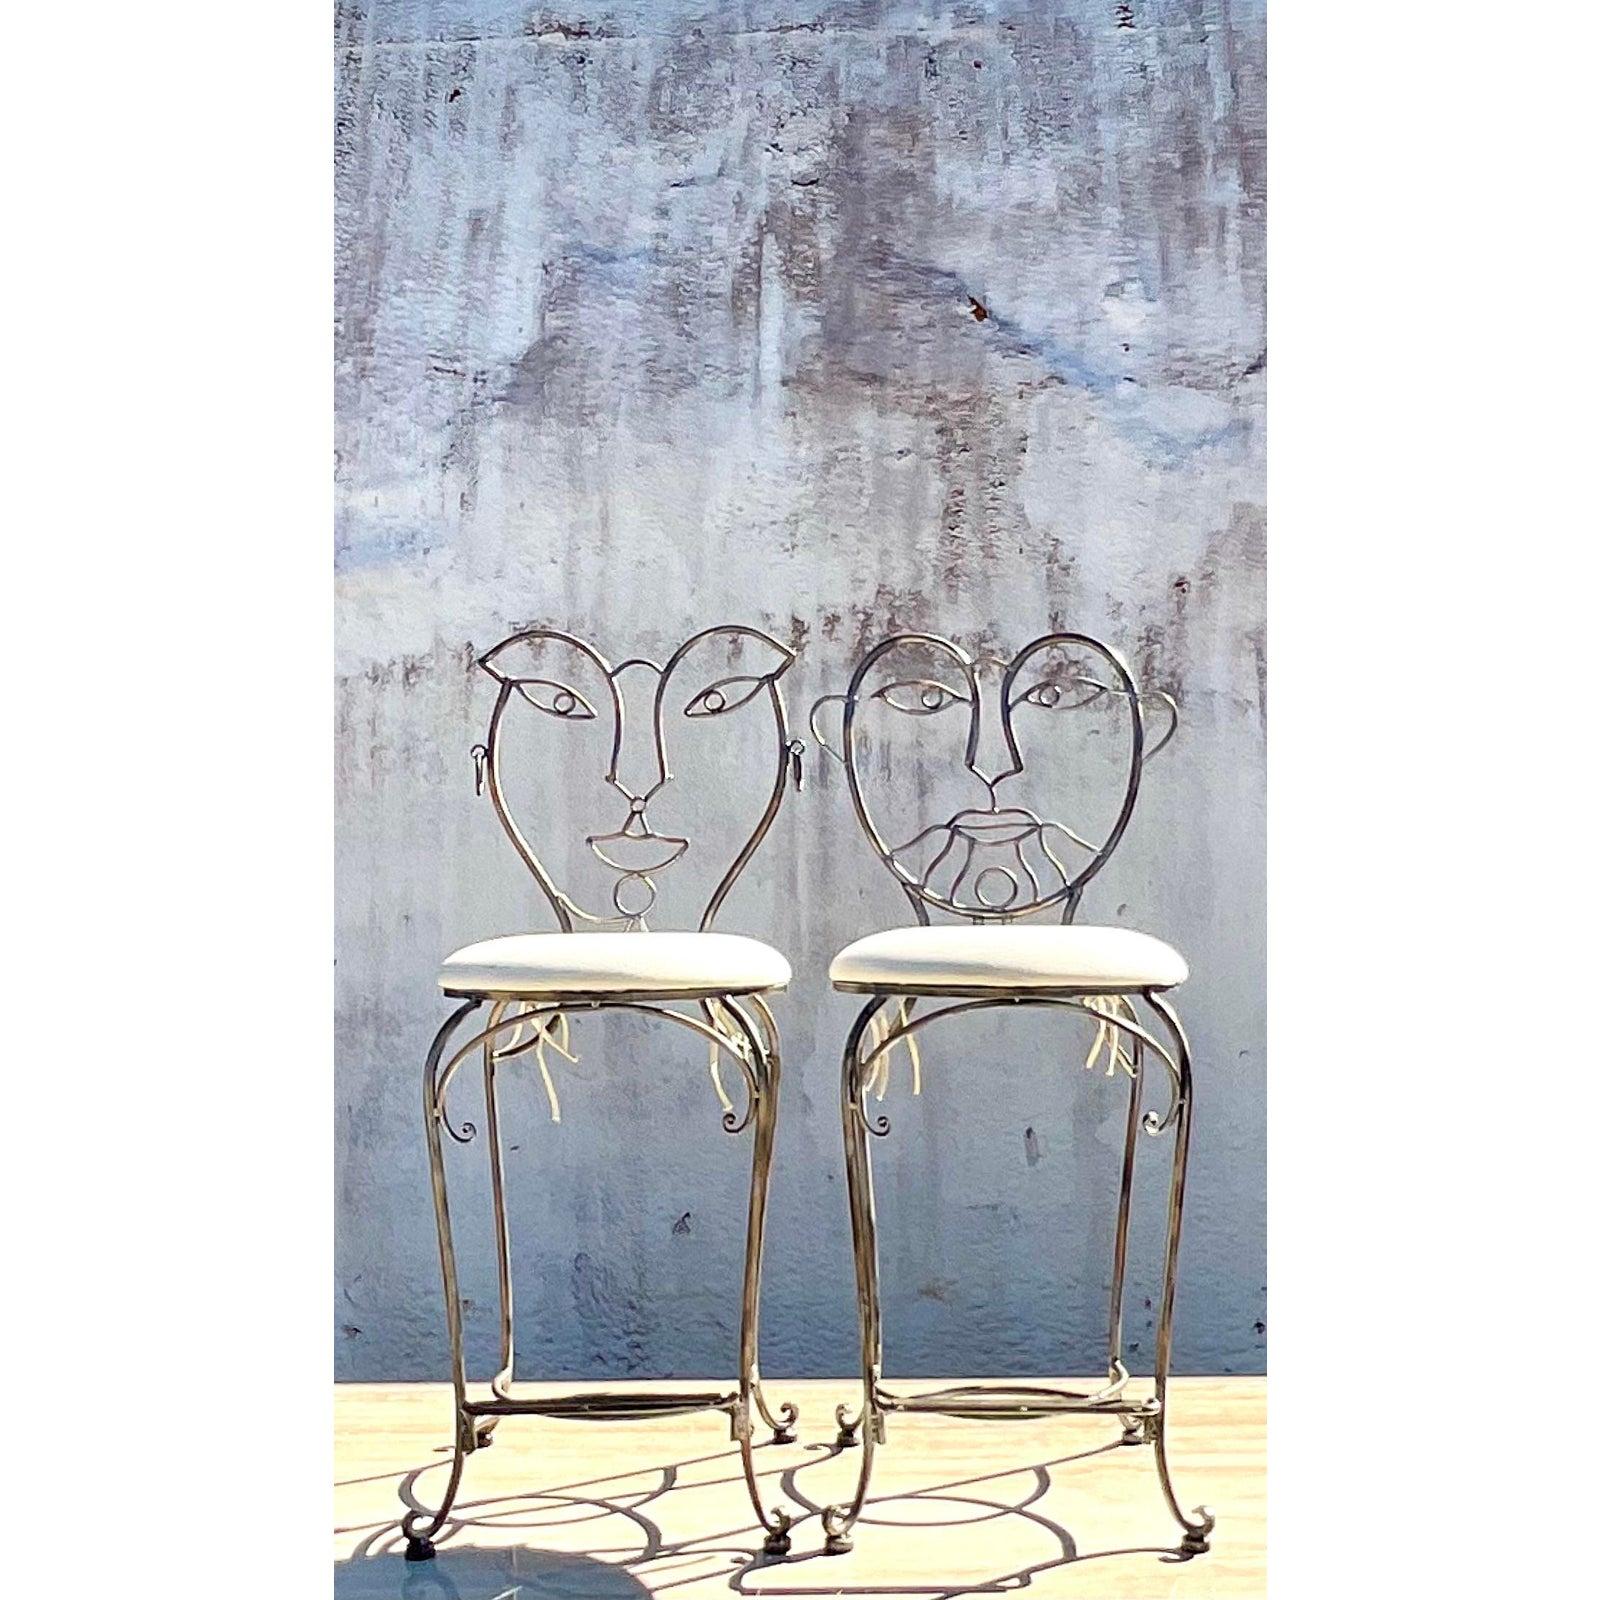 A fabulous pair of wrought iron bar stools. Done in the manner of John Risley and his iconic figurative characters. A charming addition to any décor. Acquired from a Palm Beach estate.